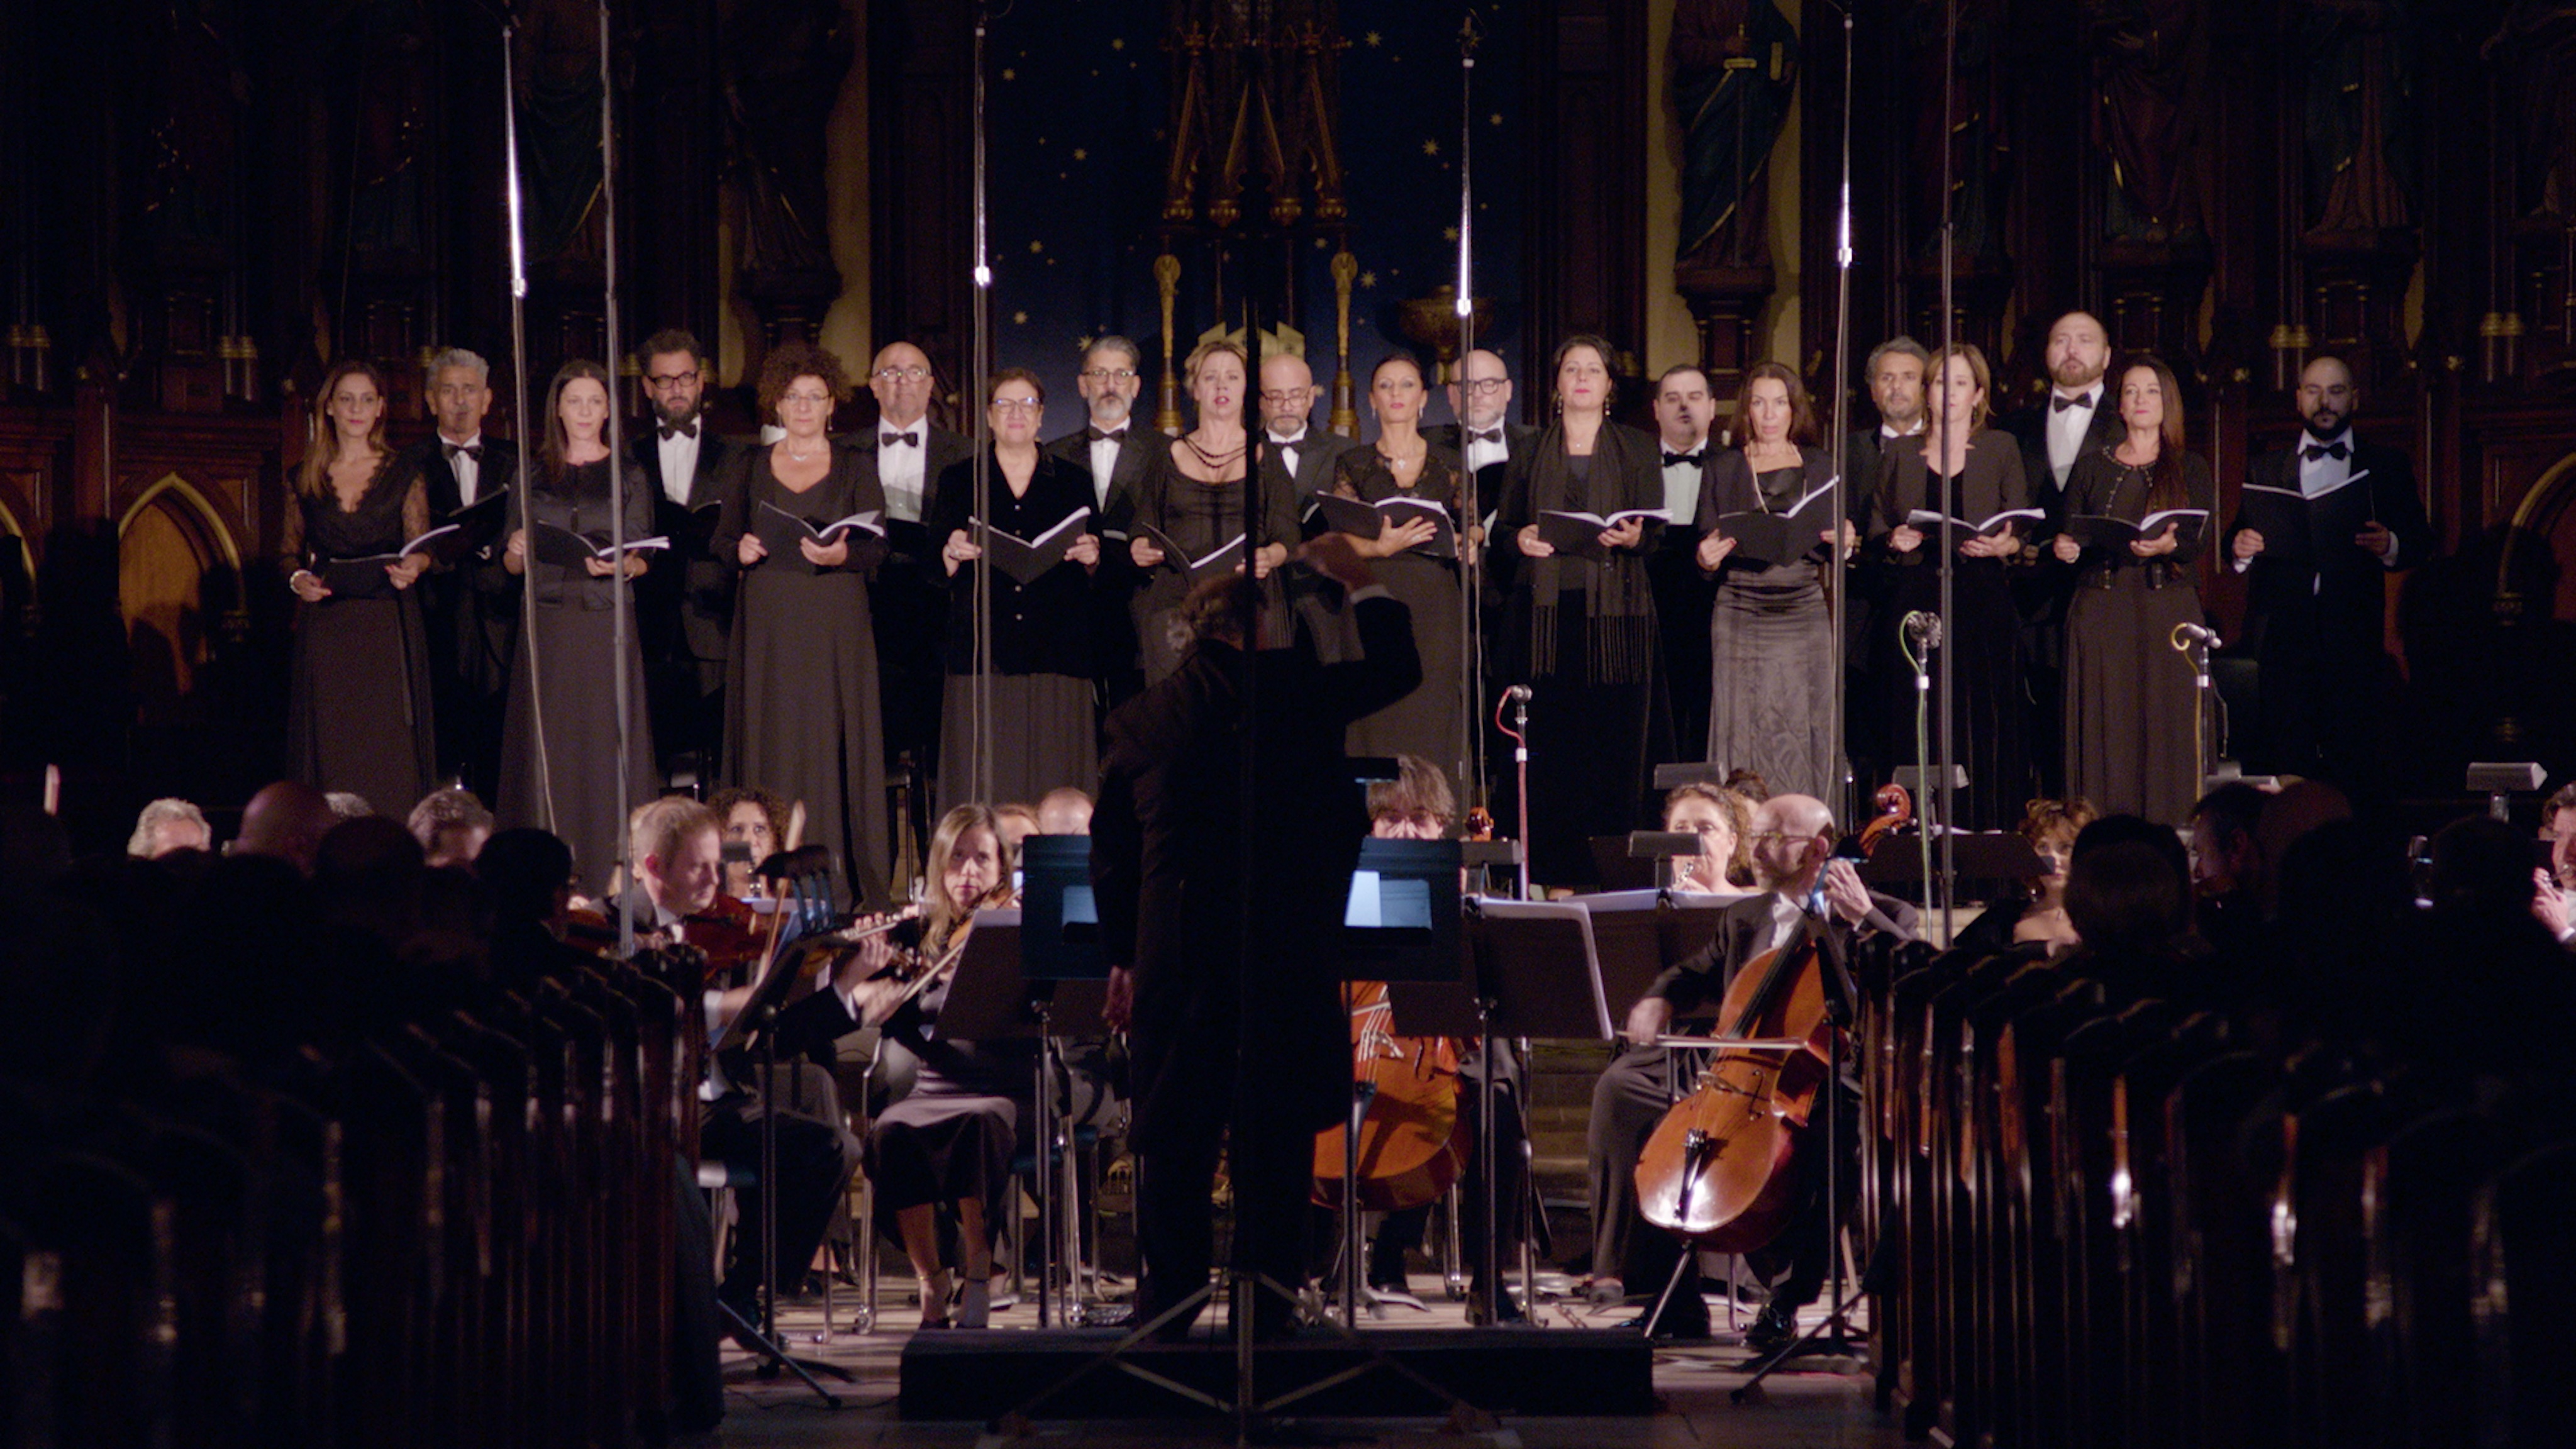 The Oratorio Full Group Performance PBS